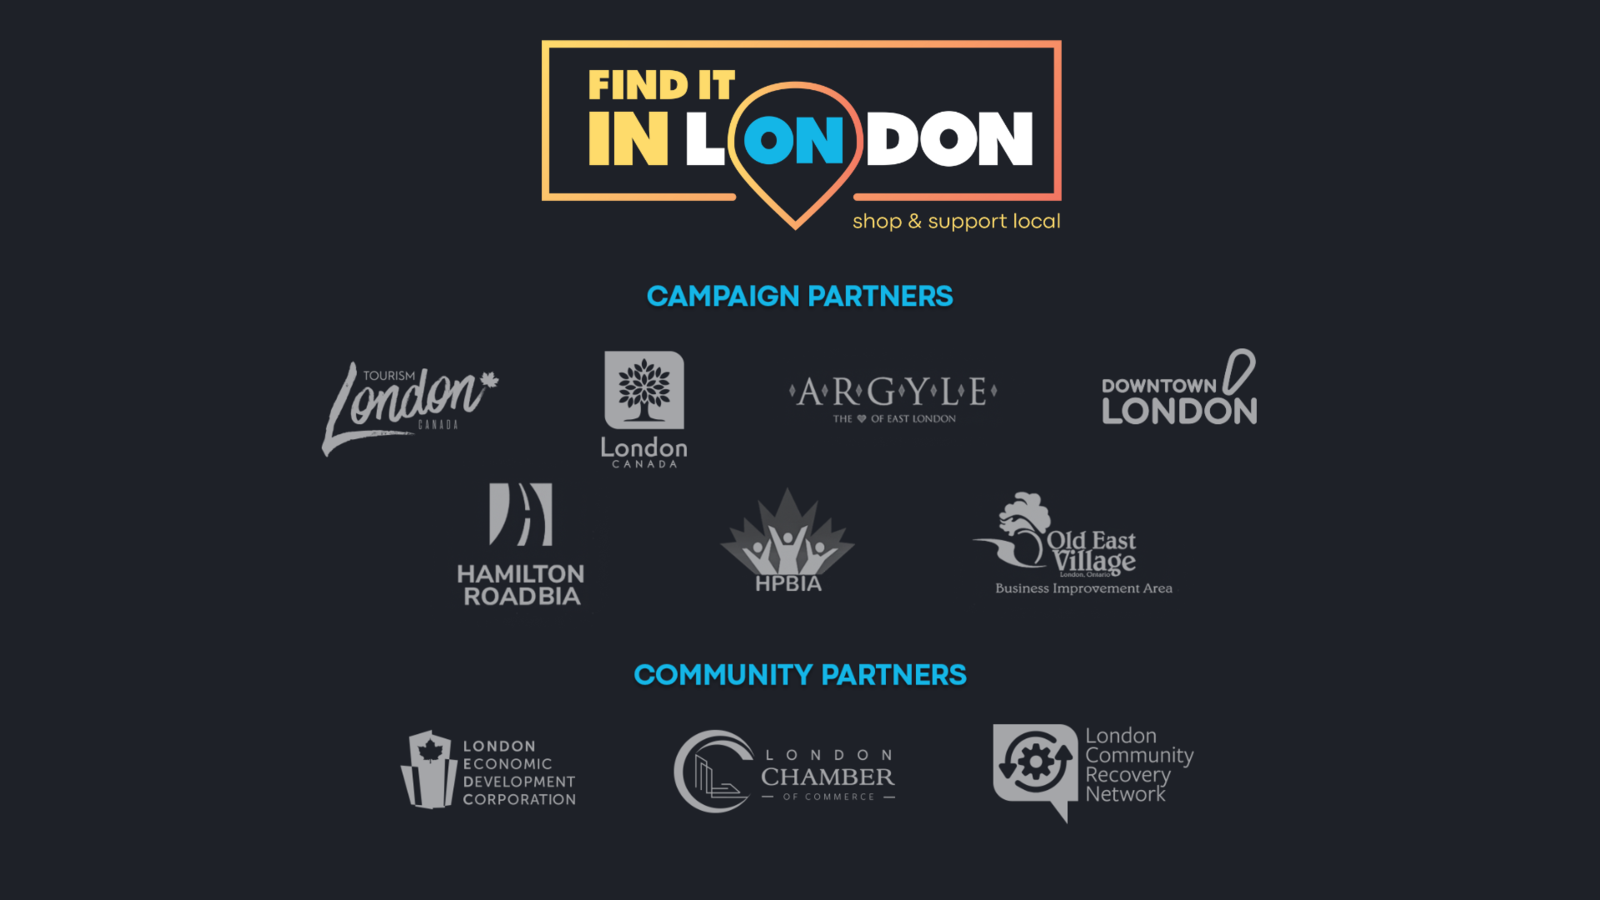 Find it in London logo and logos of their campaign partners and community partners